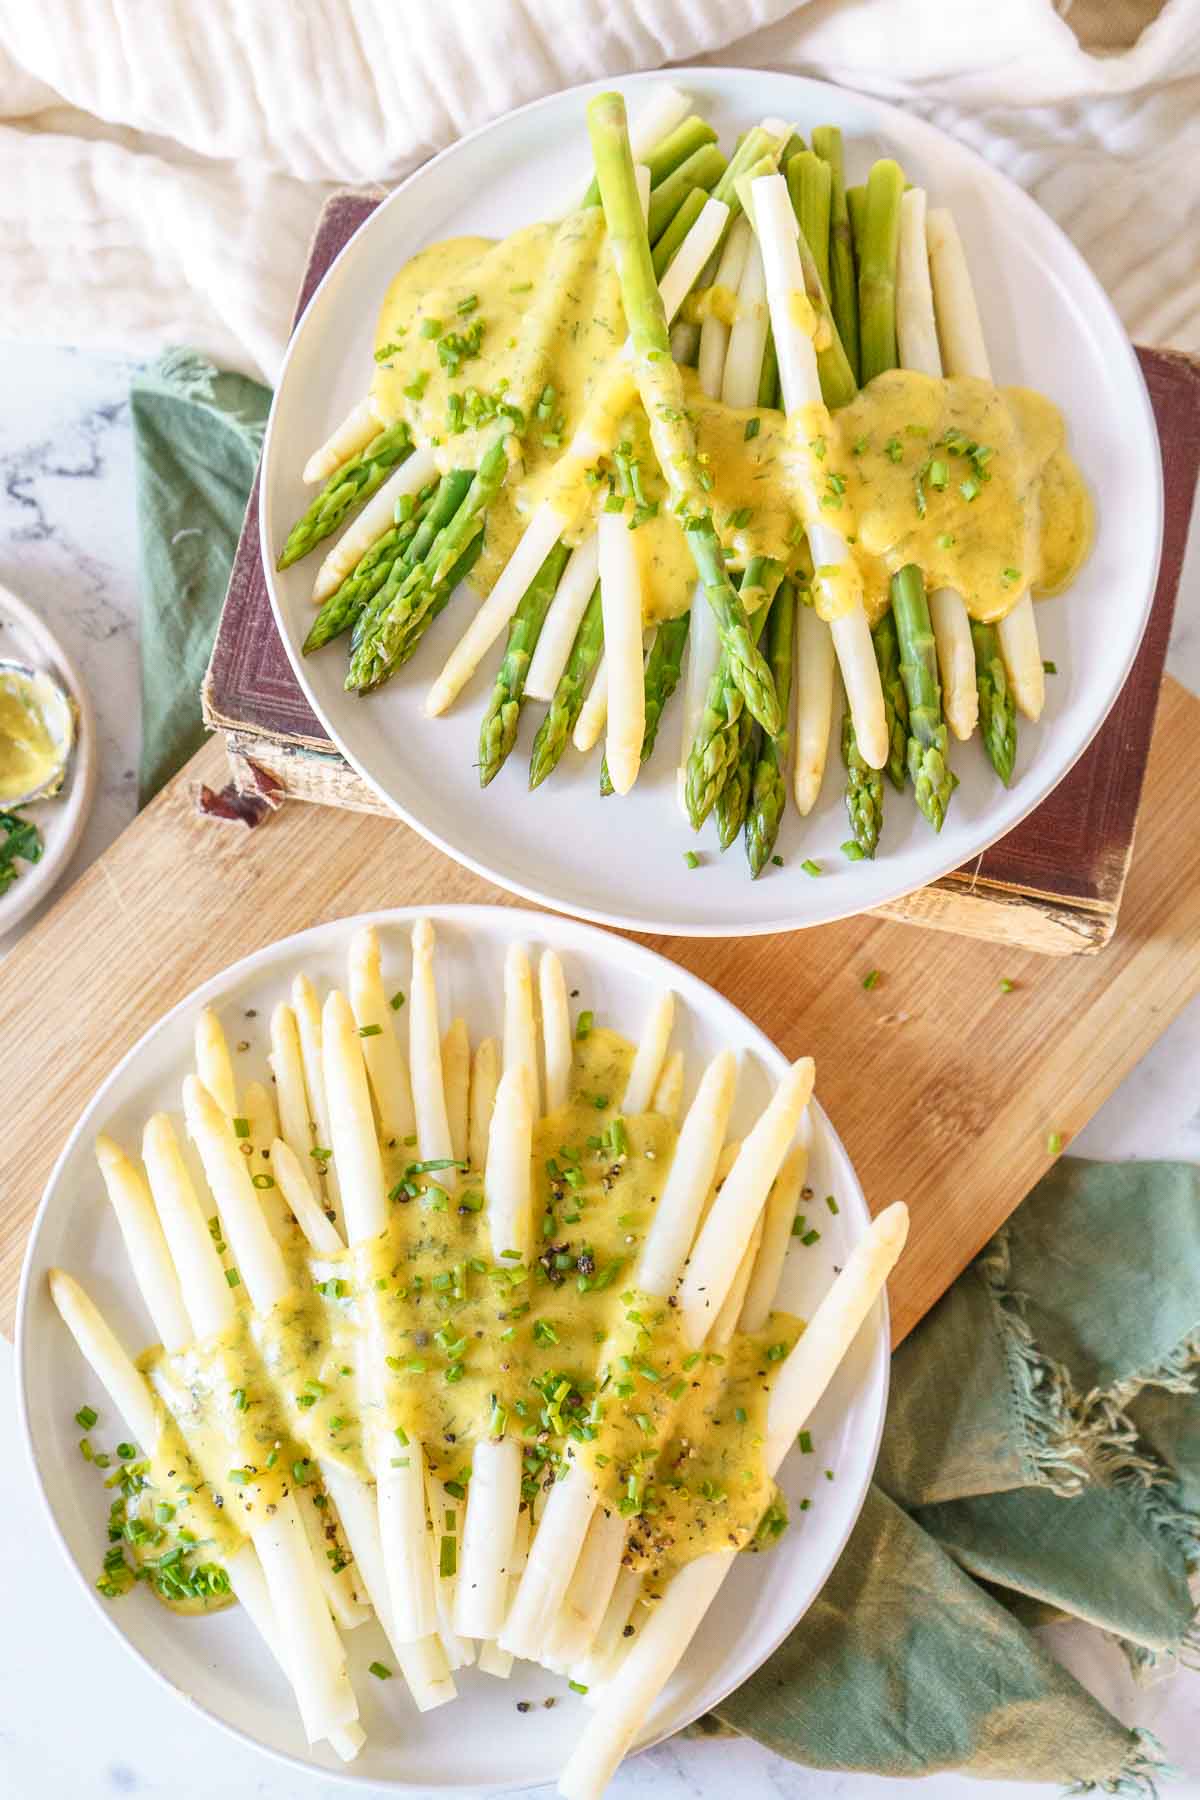 mix of green and white asparagus on plate.